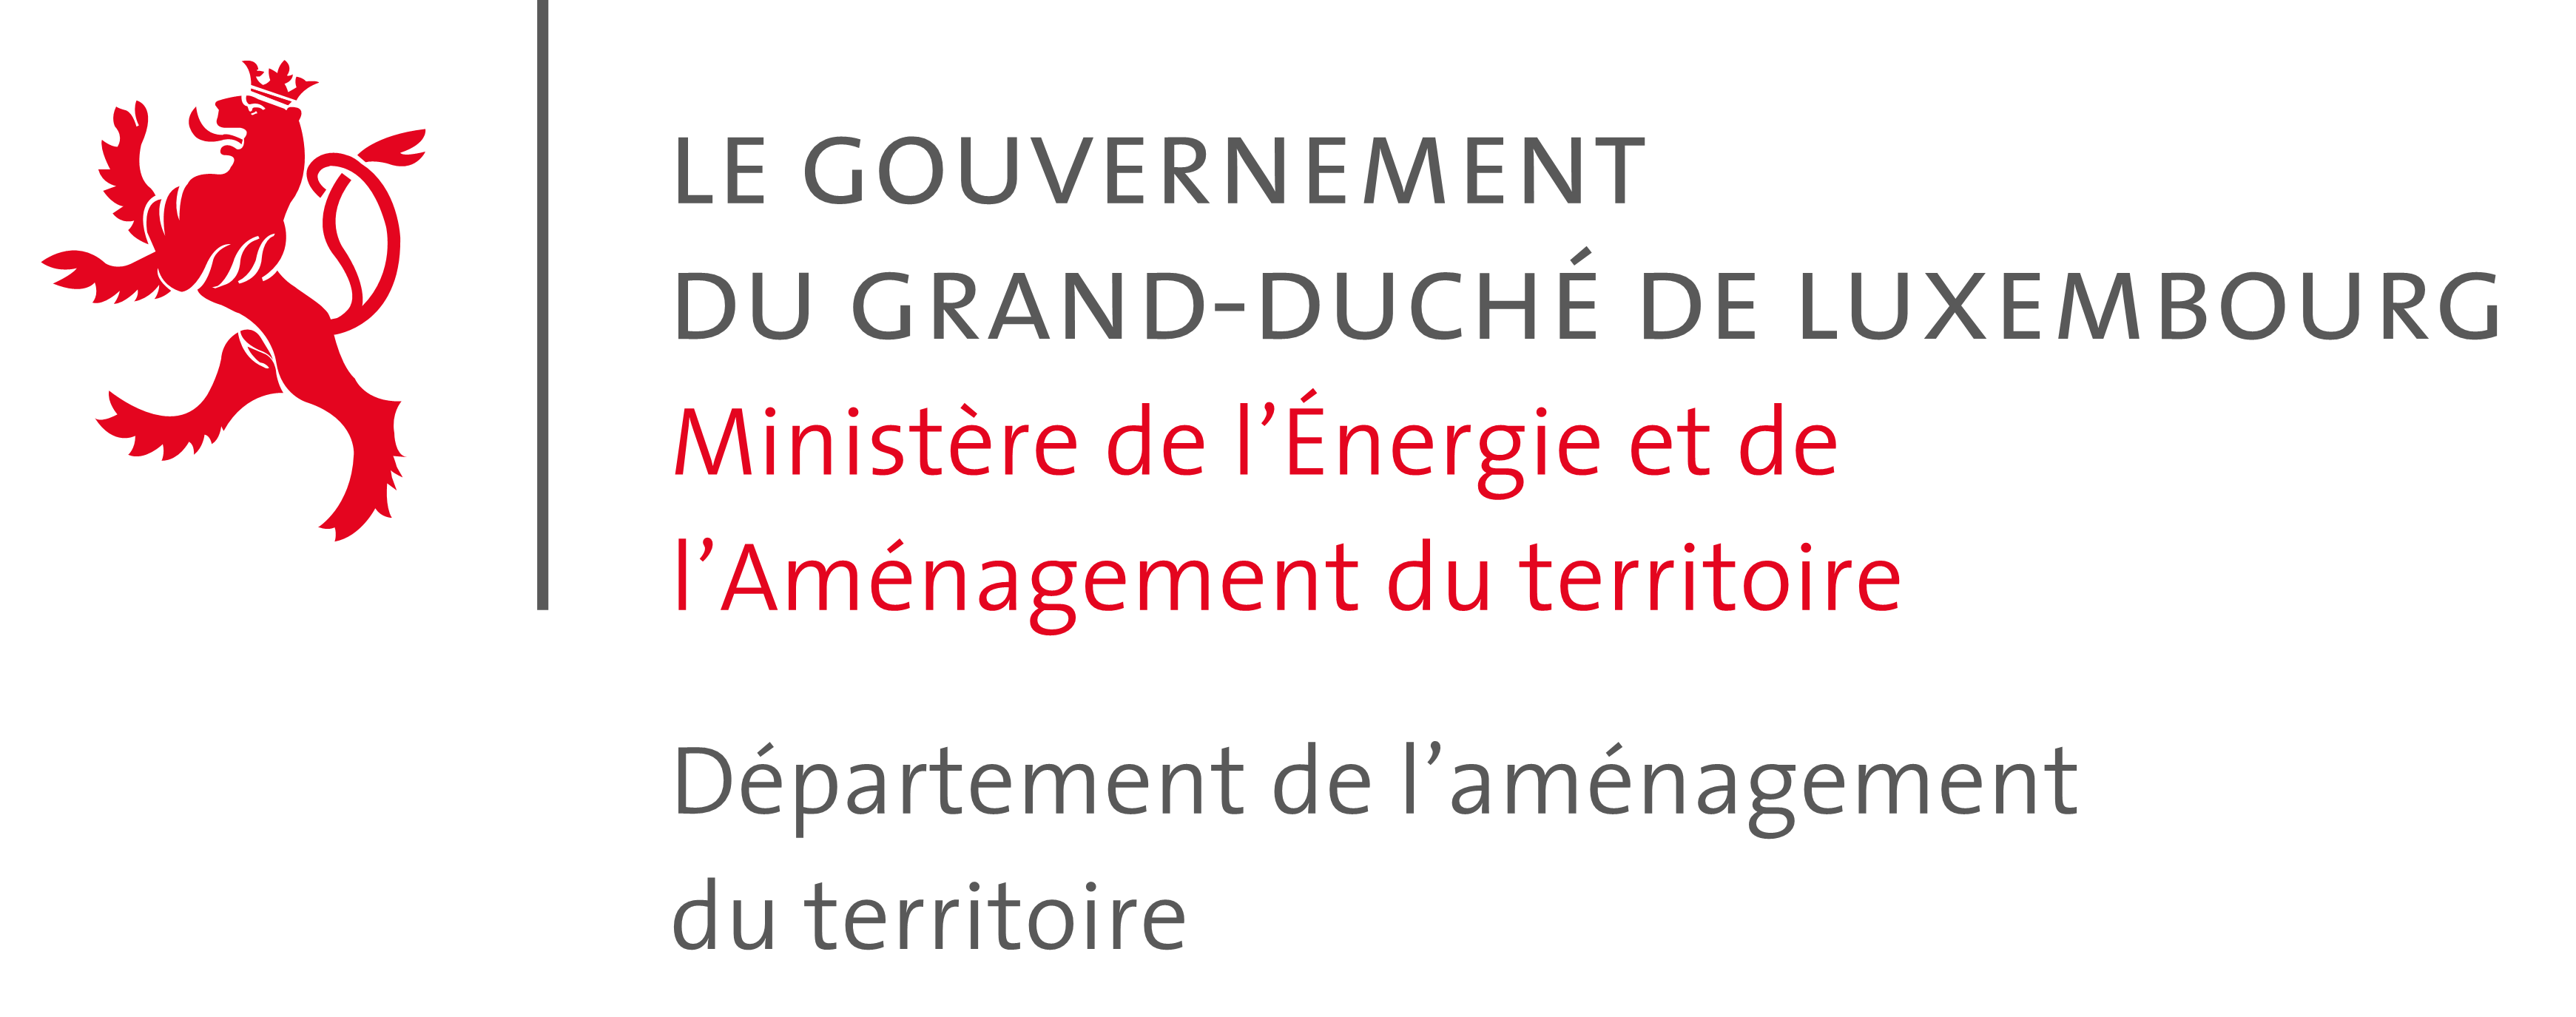 Ministry for Energy and Spatial Planning in Luxemburg